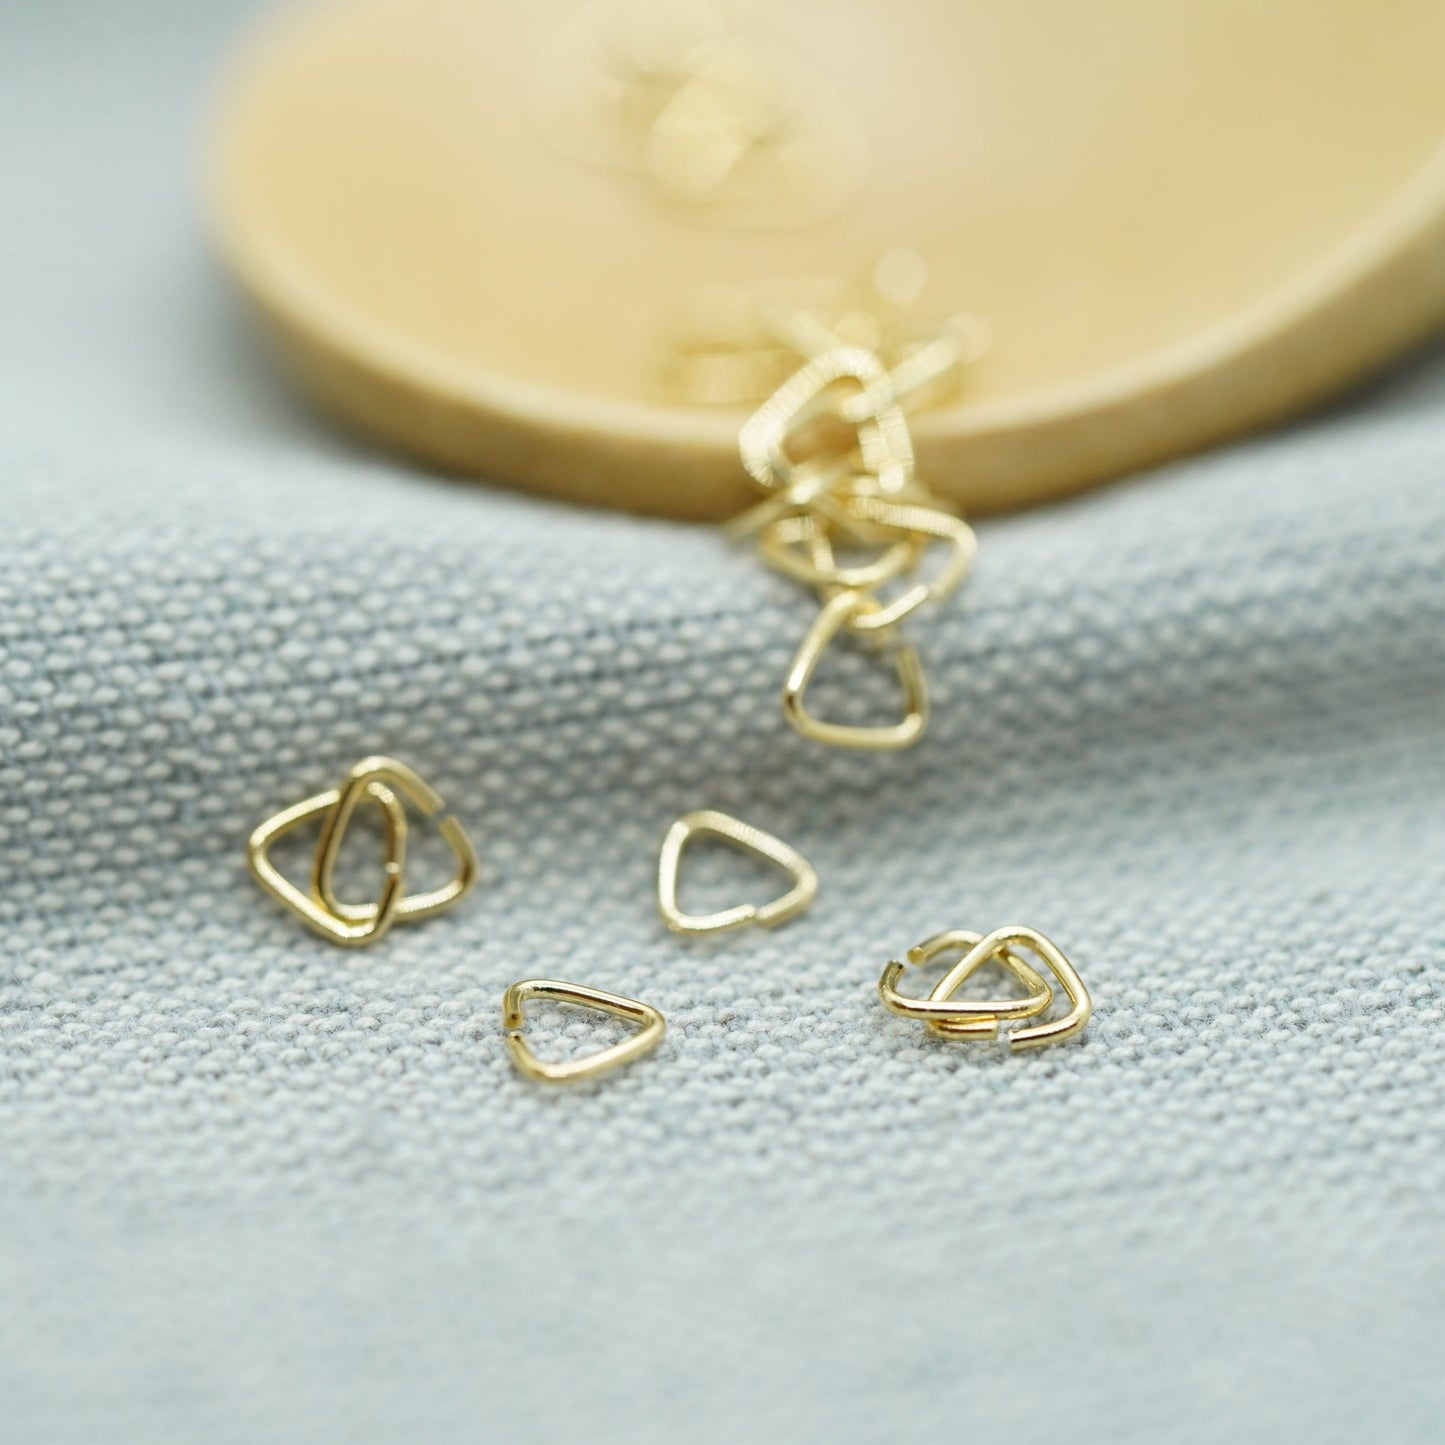 300Pcs 14Kt Gold Plated Triangle Jump Rings 5mm for jewelry making